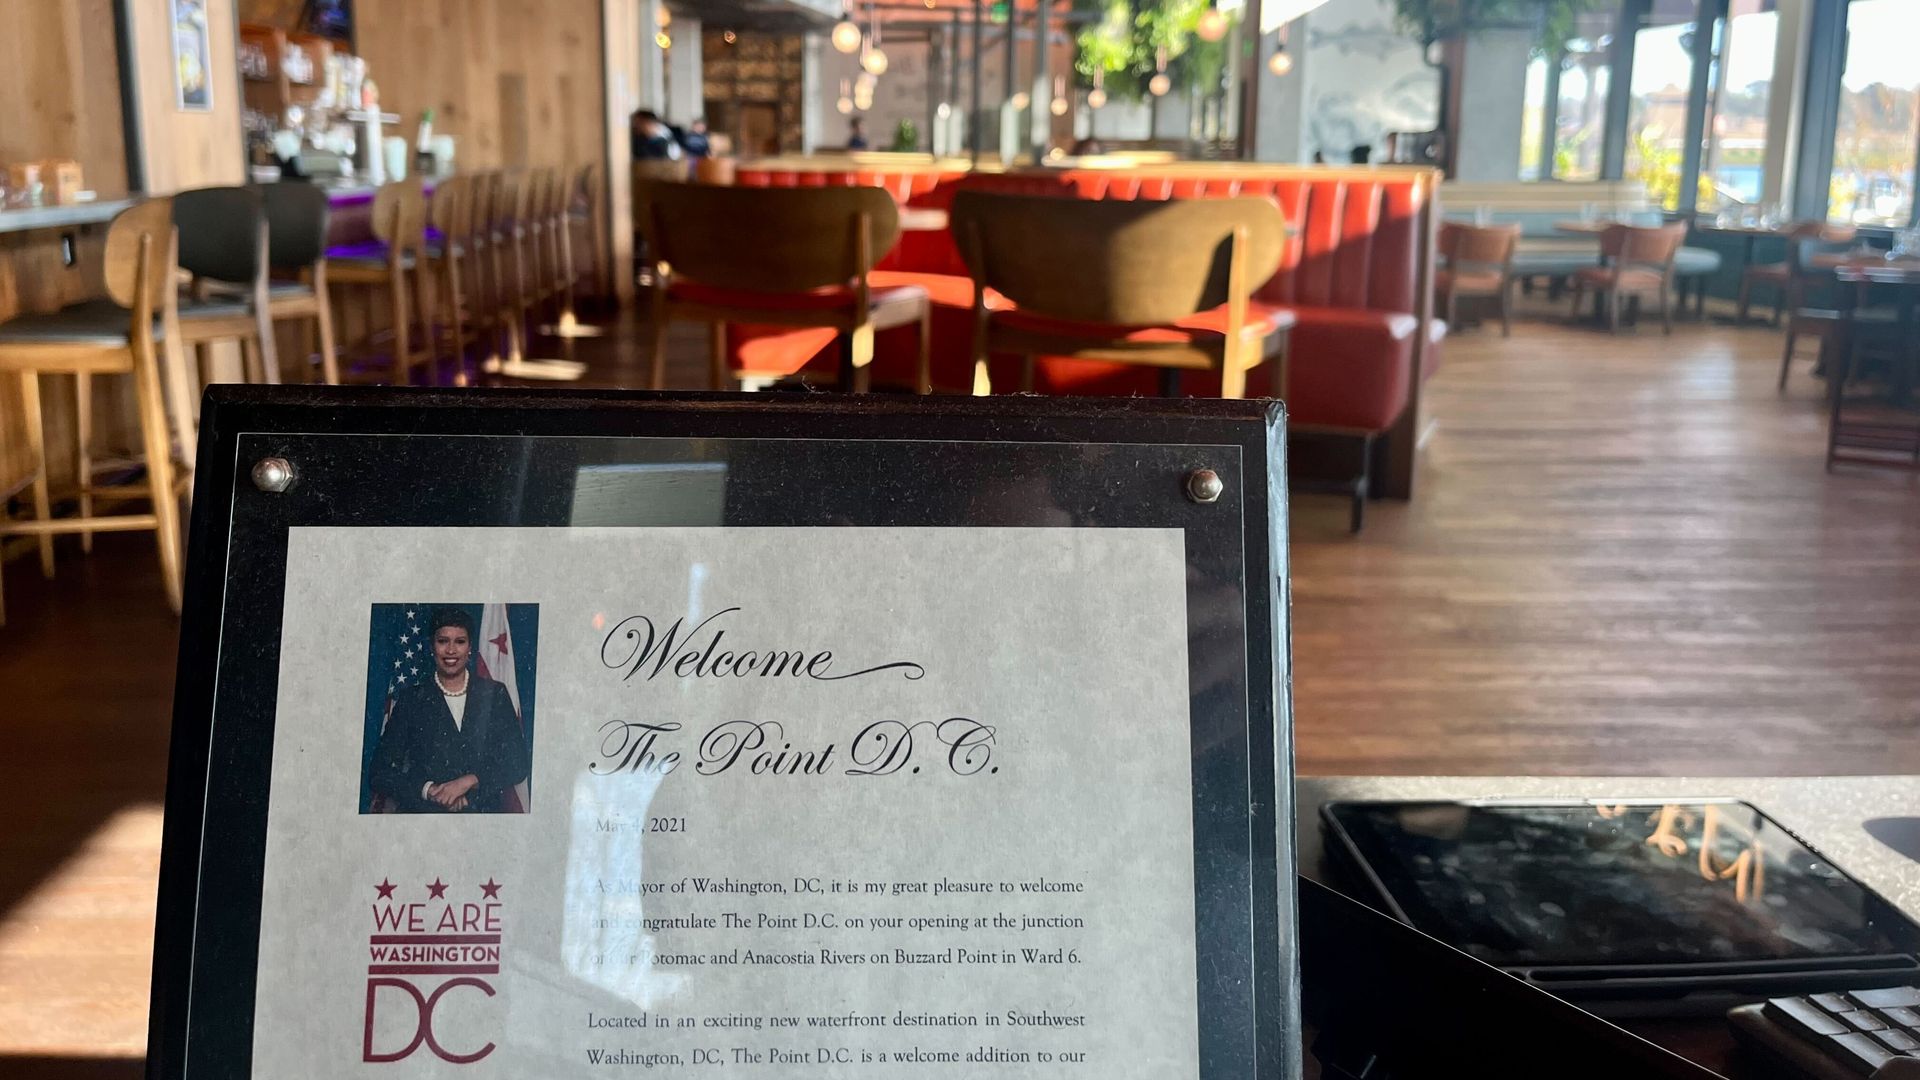 A framed letter from Mayor Bowser congratulates The Point on its opening, at the entrance of the restaurant